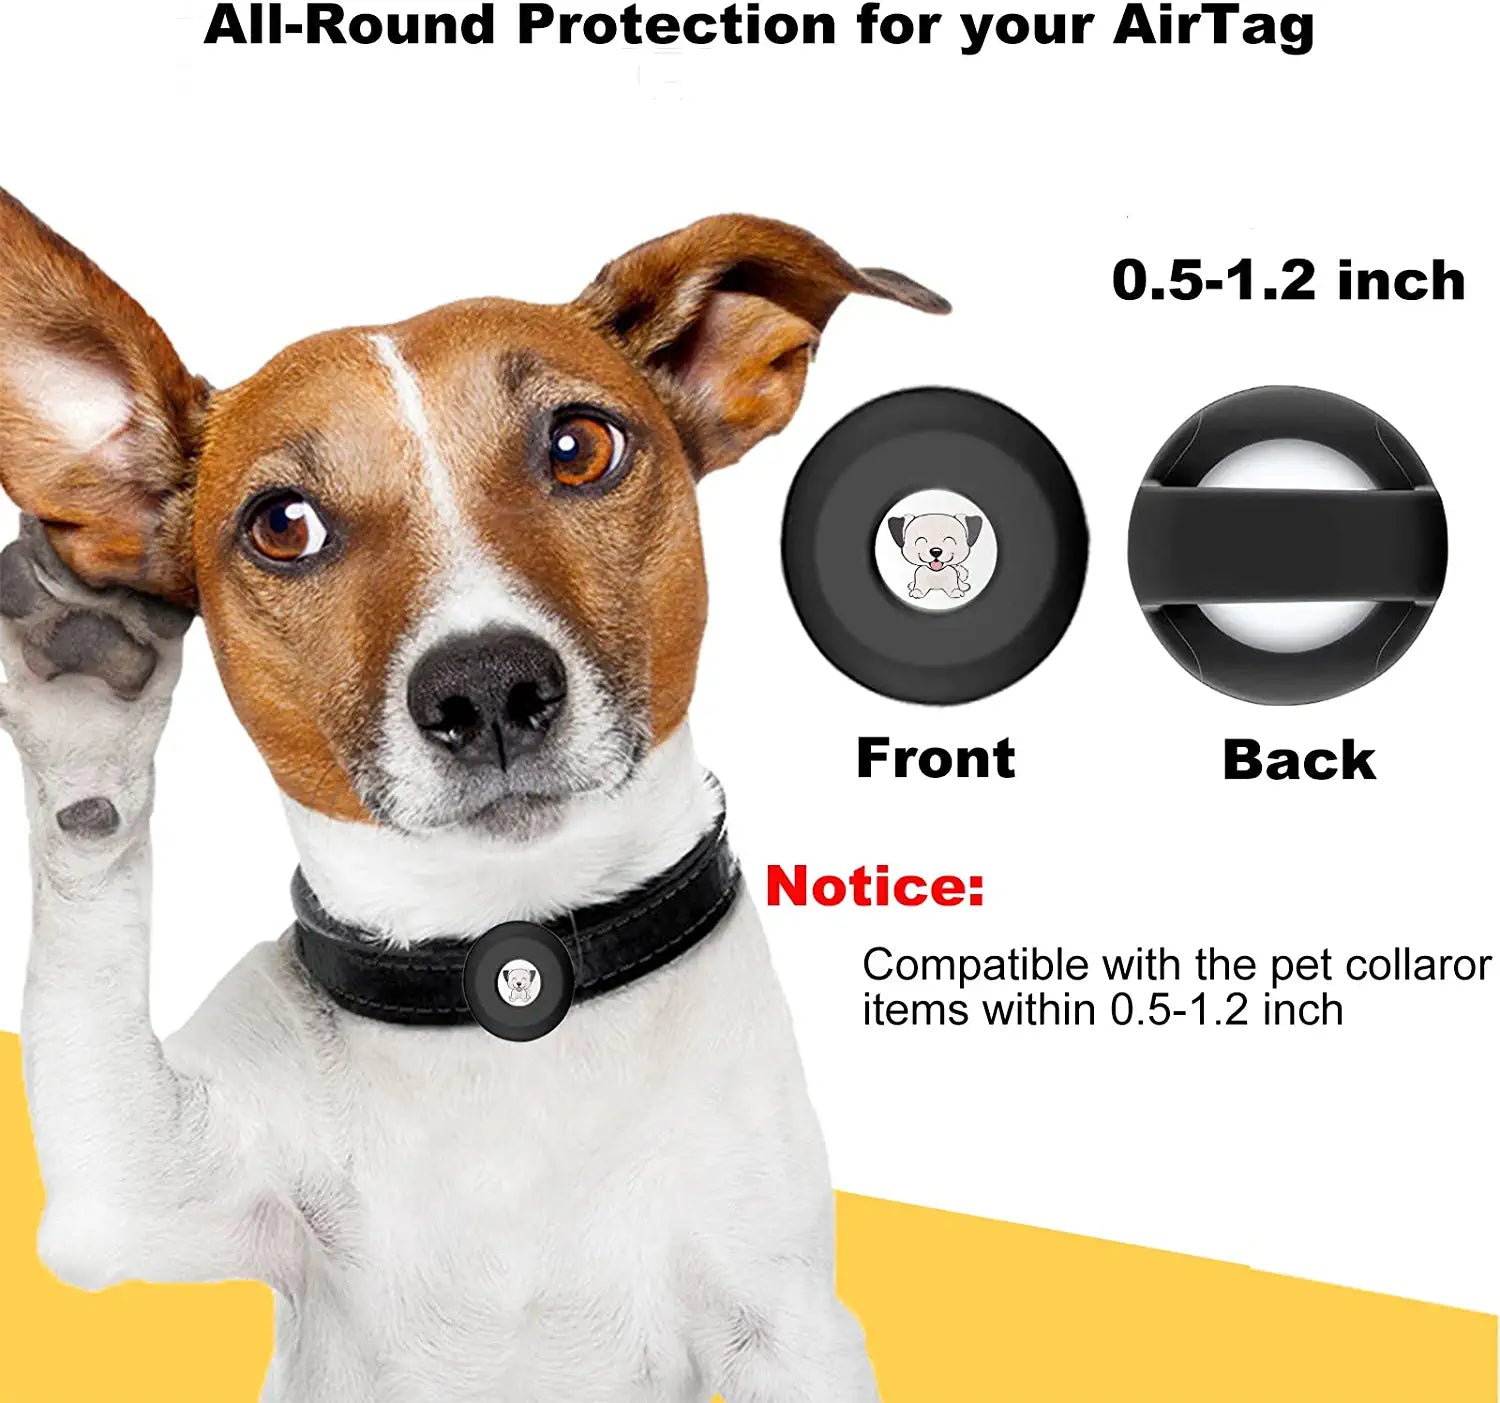 Sinvin Airtag Dog Collar Holder - Airtag Cat Collar Holder - Silicone Waterproof Apple Airtag Protective Holder for Pet Collars Wide within 1/2"